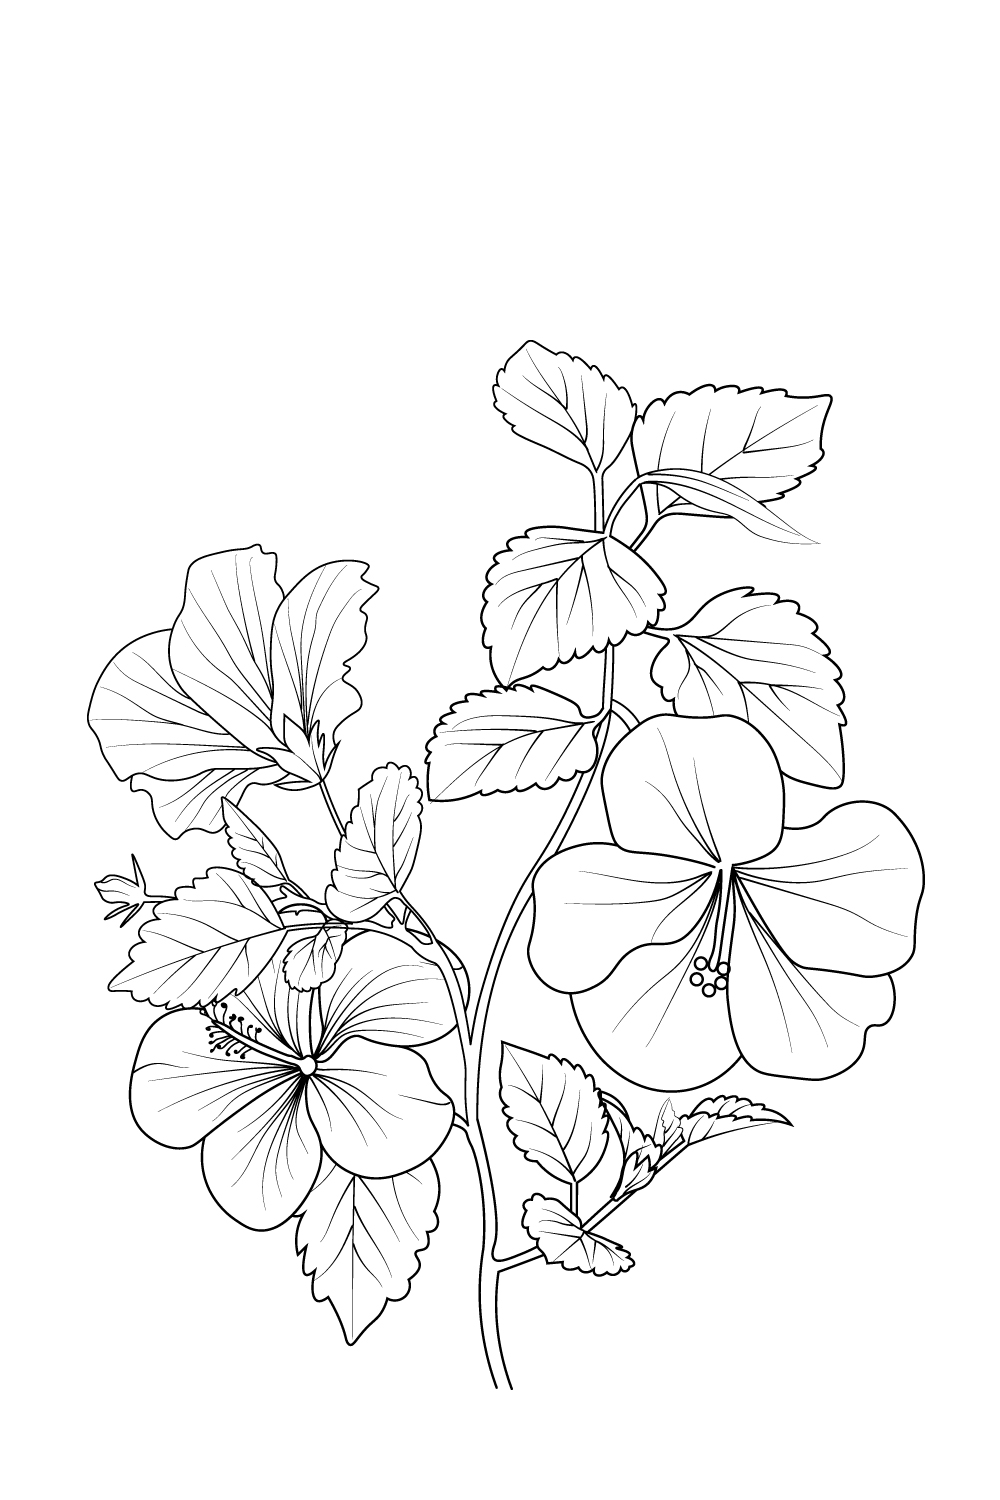 doodle common hibiscus flower line art coloring book page of vector graphic  design:: tasmeemME.com